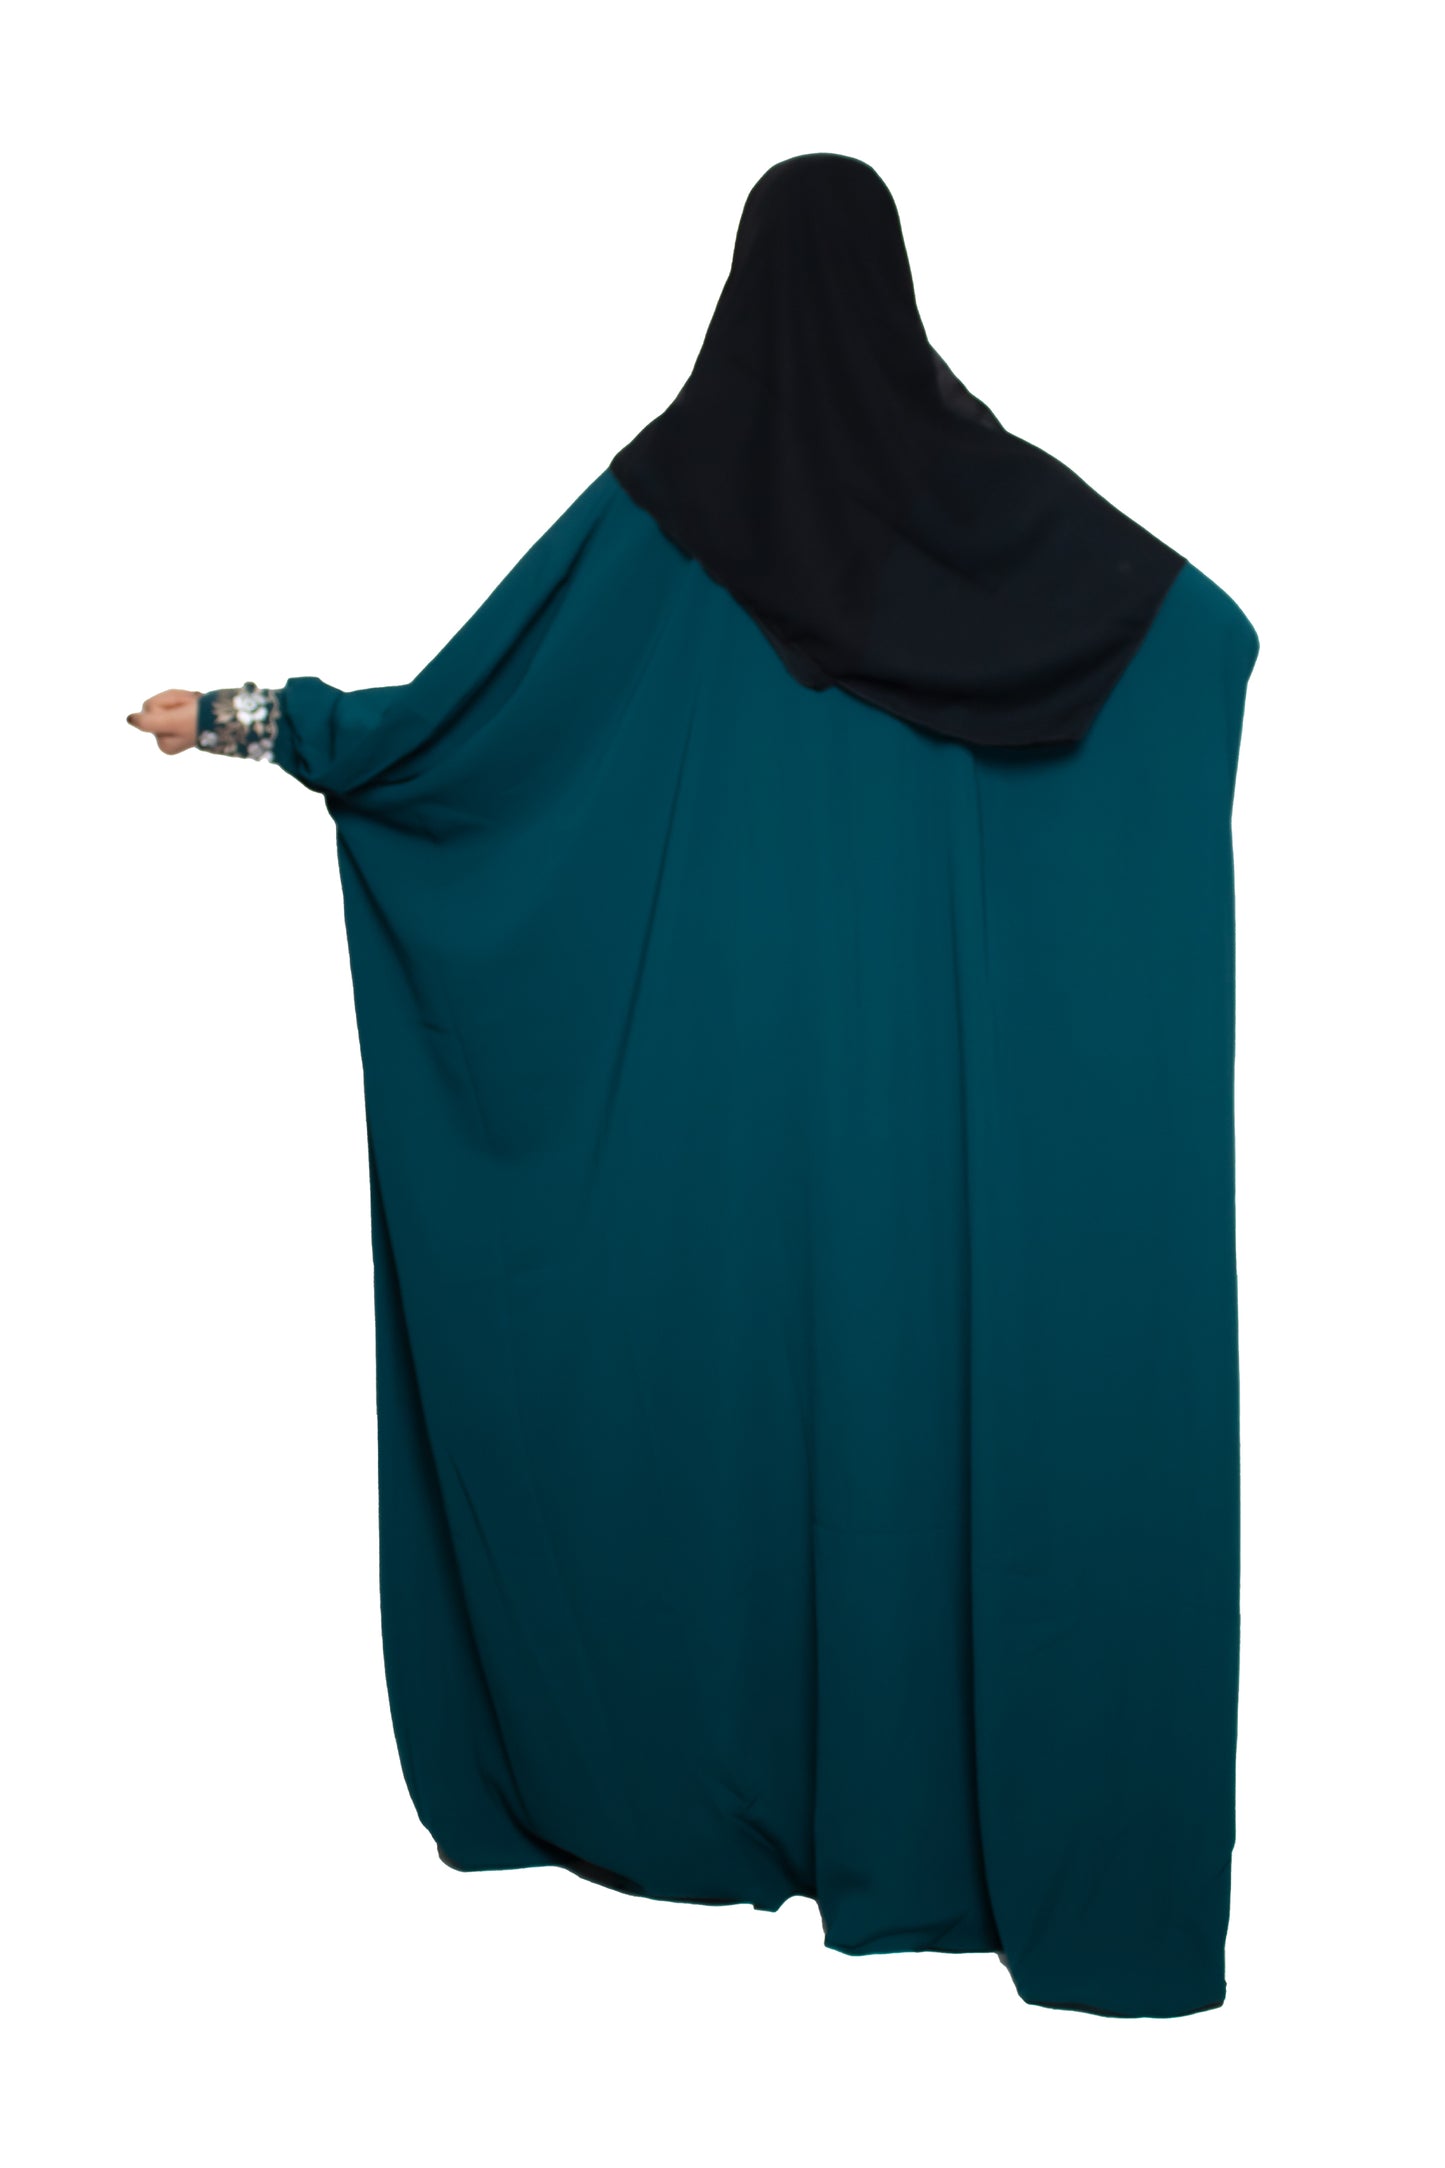 Modest City Self Design Rama Green Beighi Embroidery Crepe Abaya or Burqa With Hijab for Women & Girls-Series Laiba